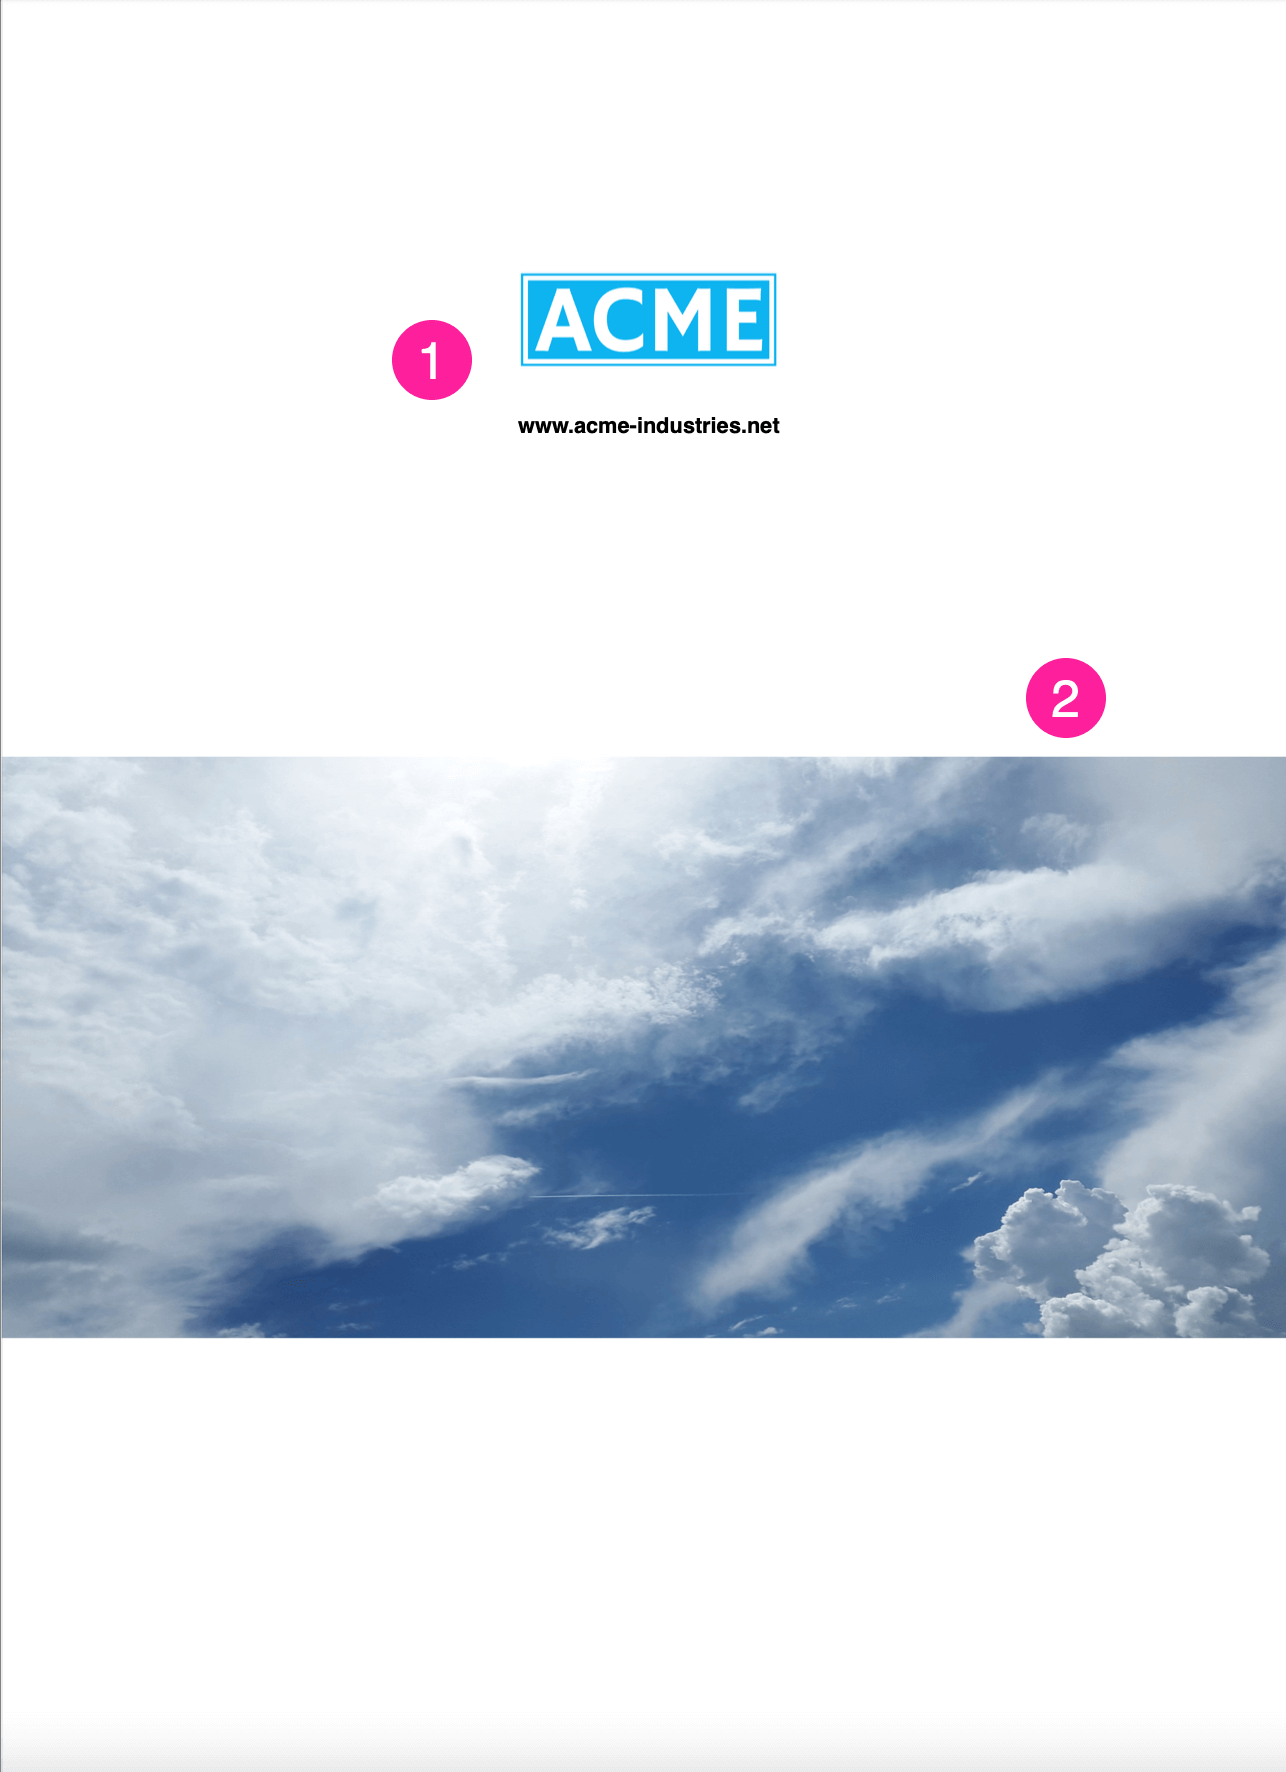 Example of a back cover. There is a content box that contains a logo and a web address and it is labelled 1. The background of the page is a white image with a band of sky and it is labelled 2.